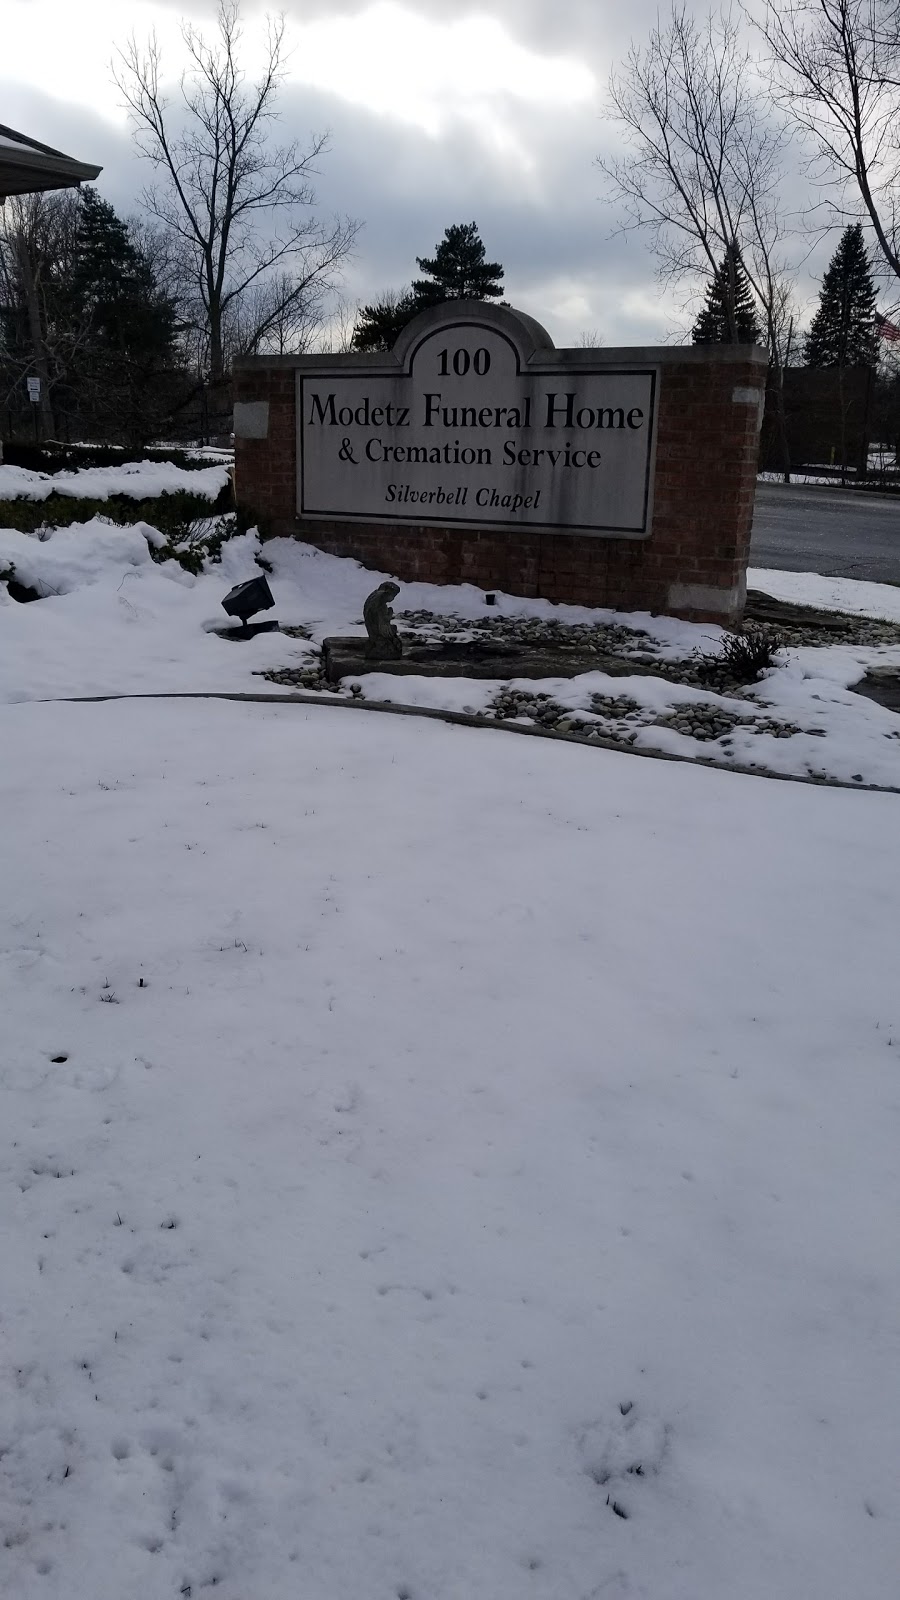 Modetz Funeral Home & Cremation Service Silverbell Chapel | 100 E Silverbell Rd, Orion Twp, MI 48360, USA | Phone: (248) 371-3777